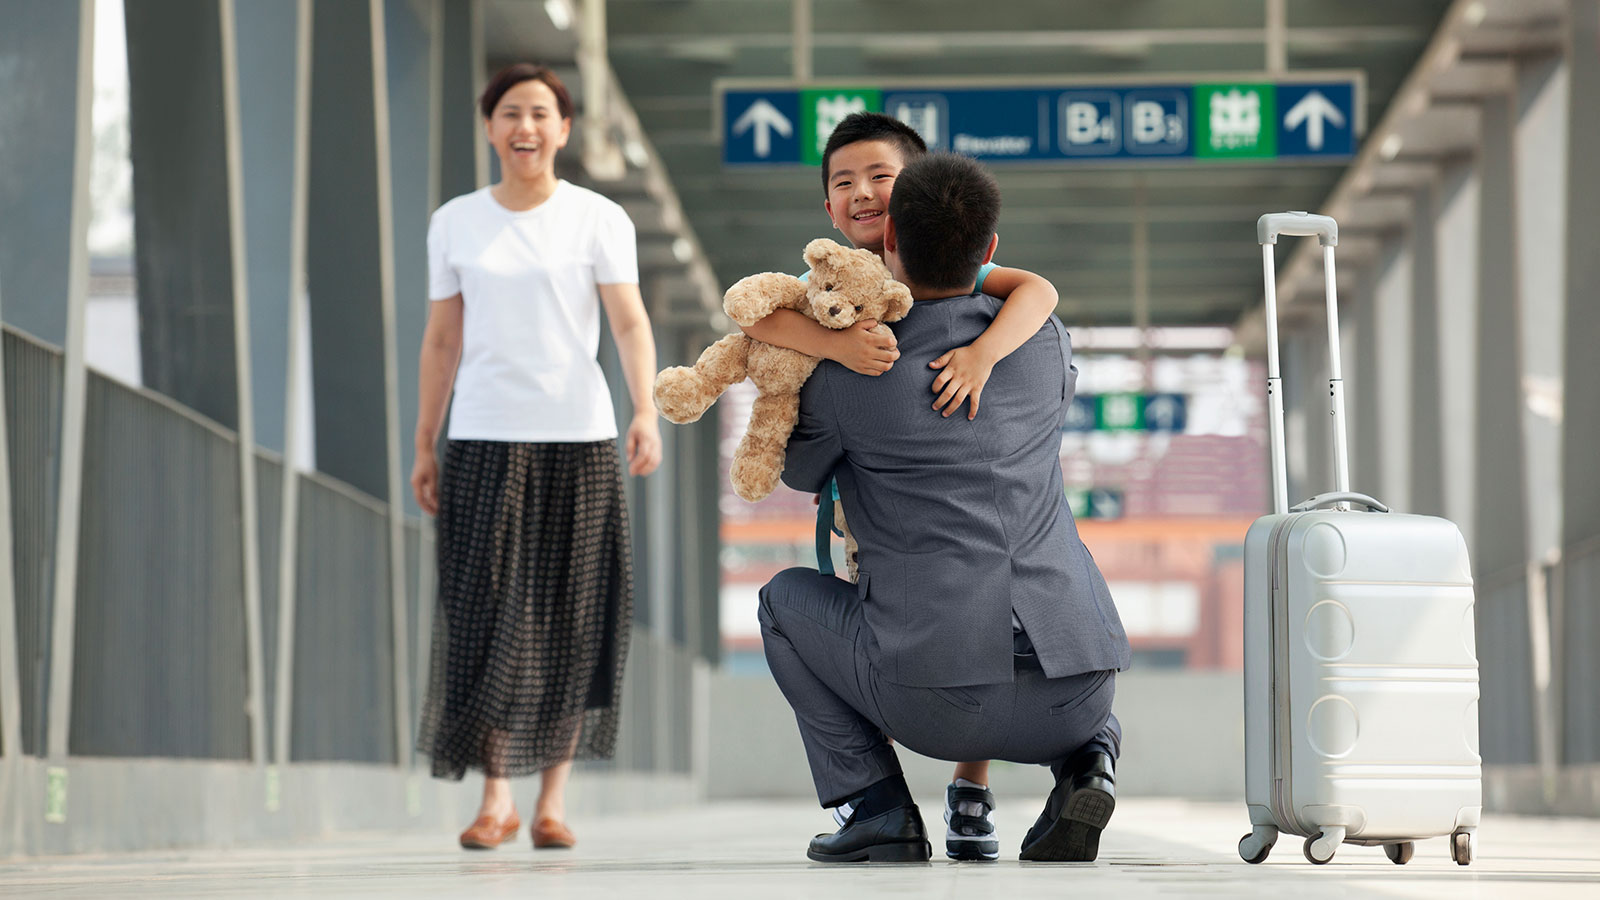 child holding teddy bear running to embrace father in airport